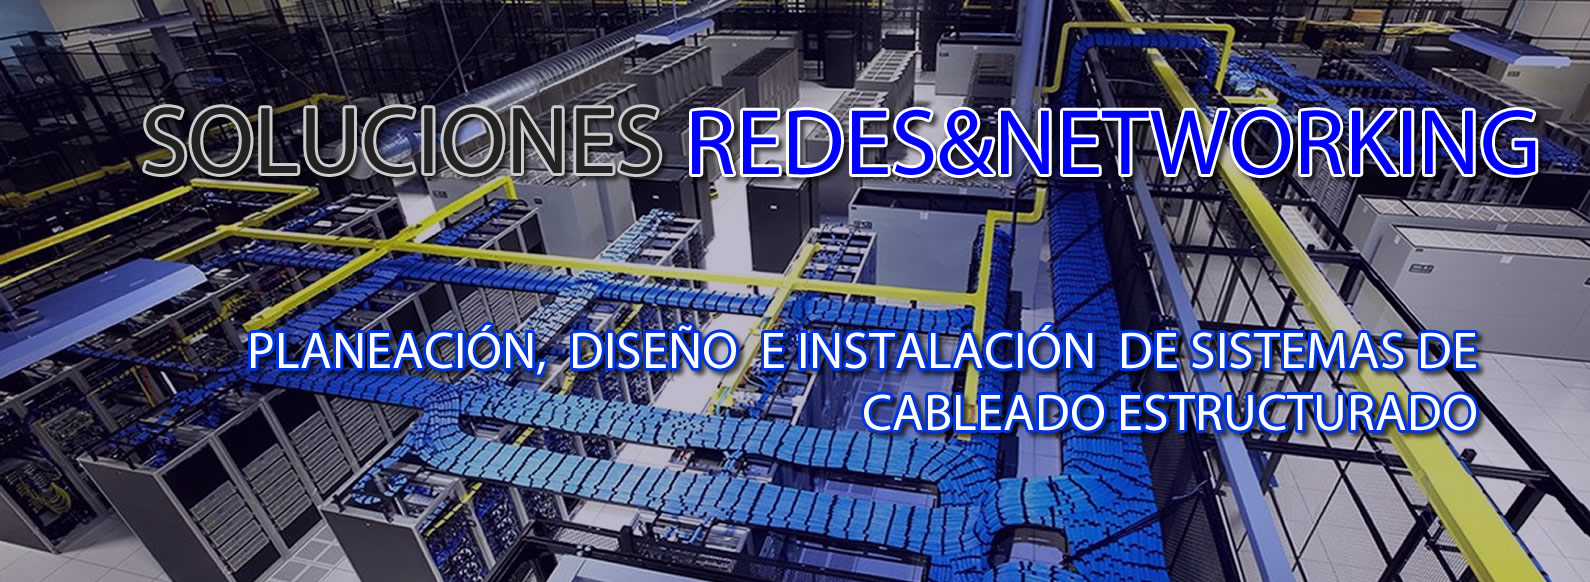 redes networking